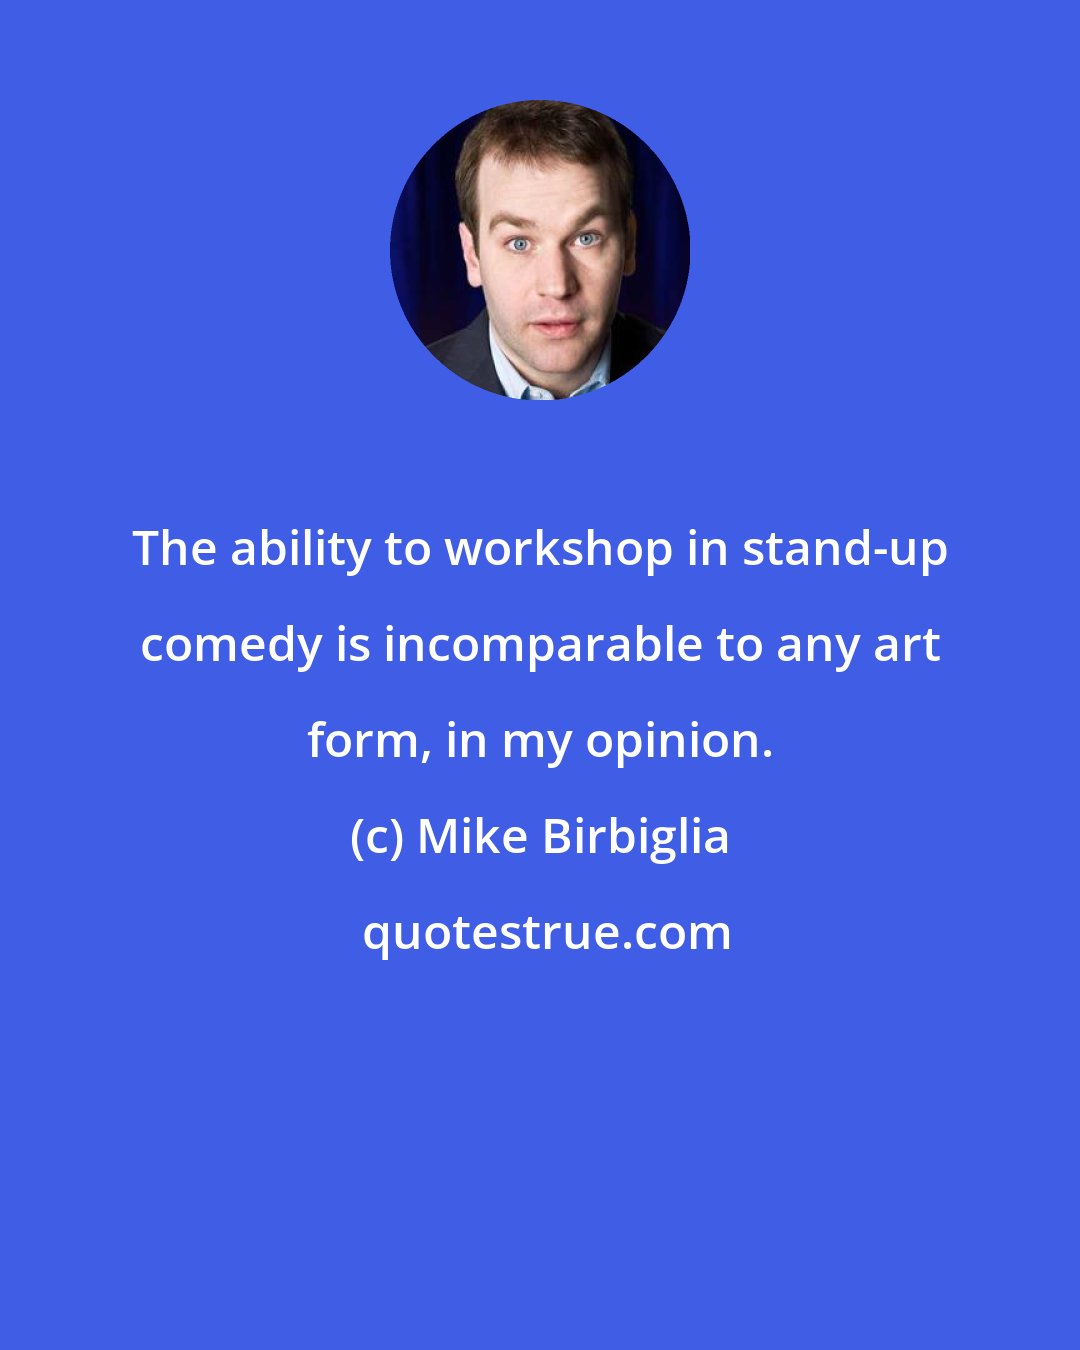 Mike Birbiglia: The ability to workshop in stand-up comedy is incomparable to any art form, in my opinion.